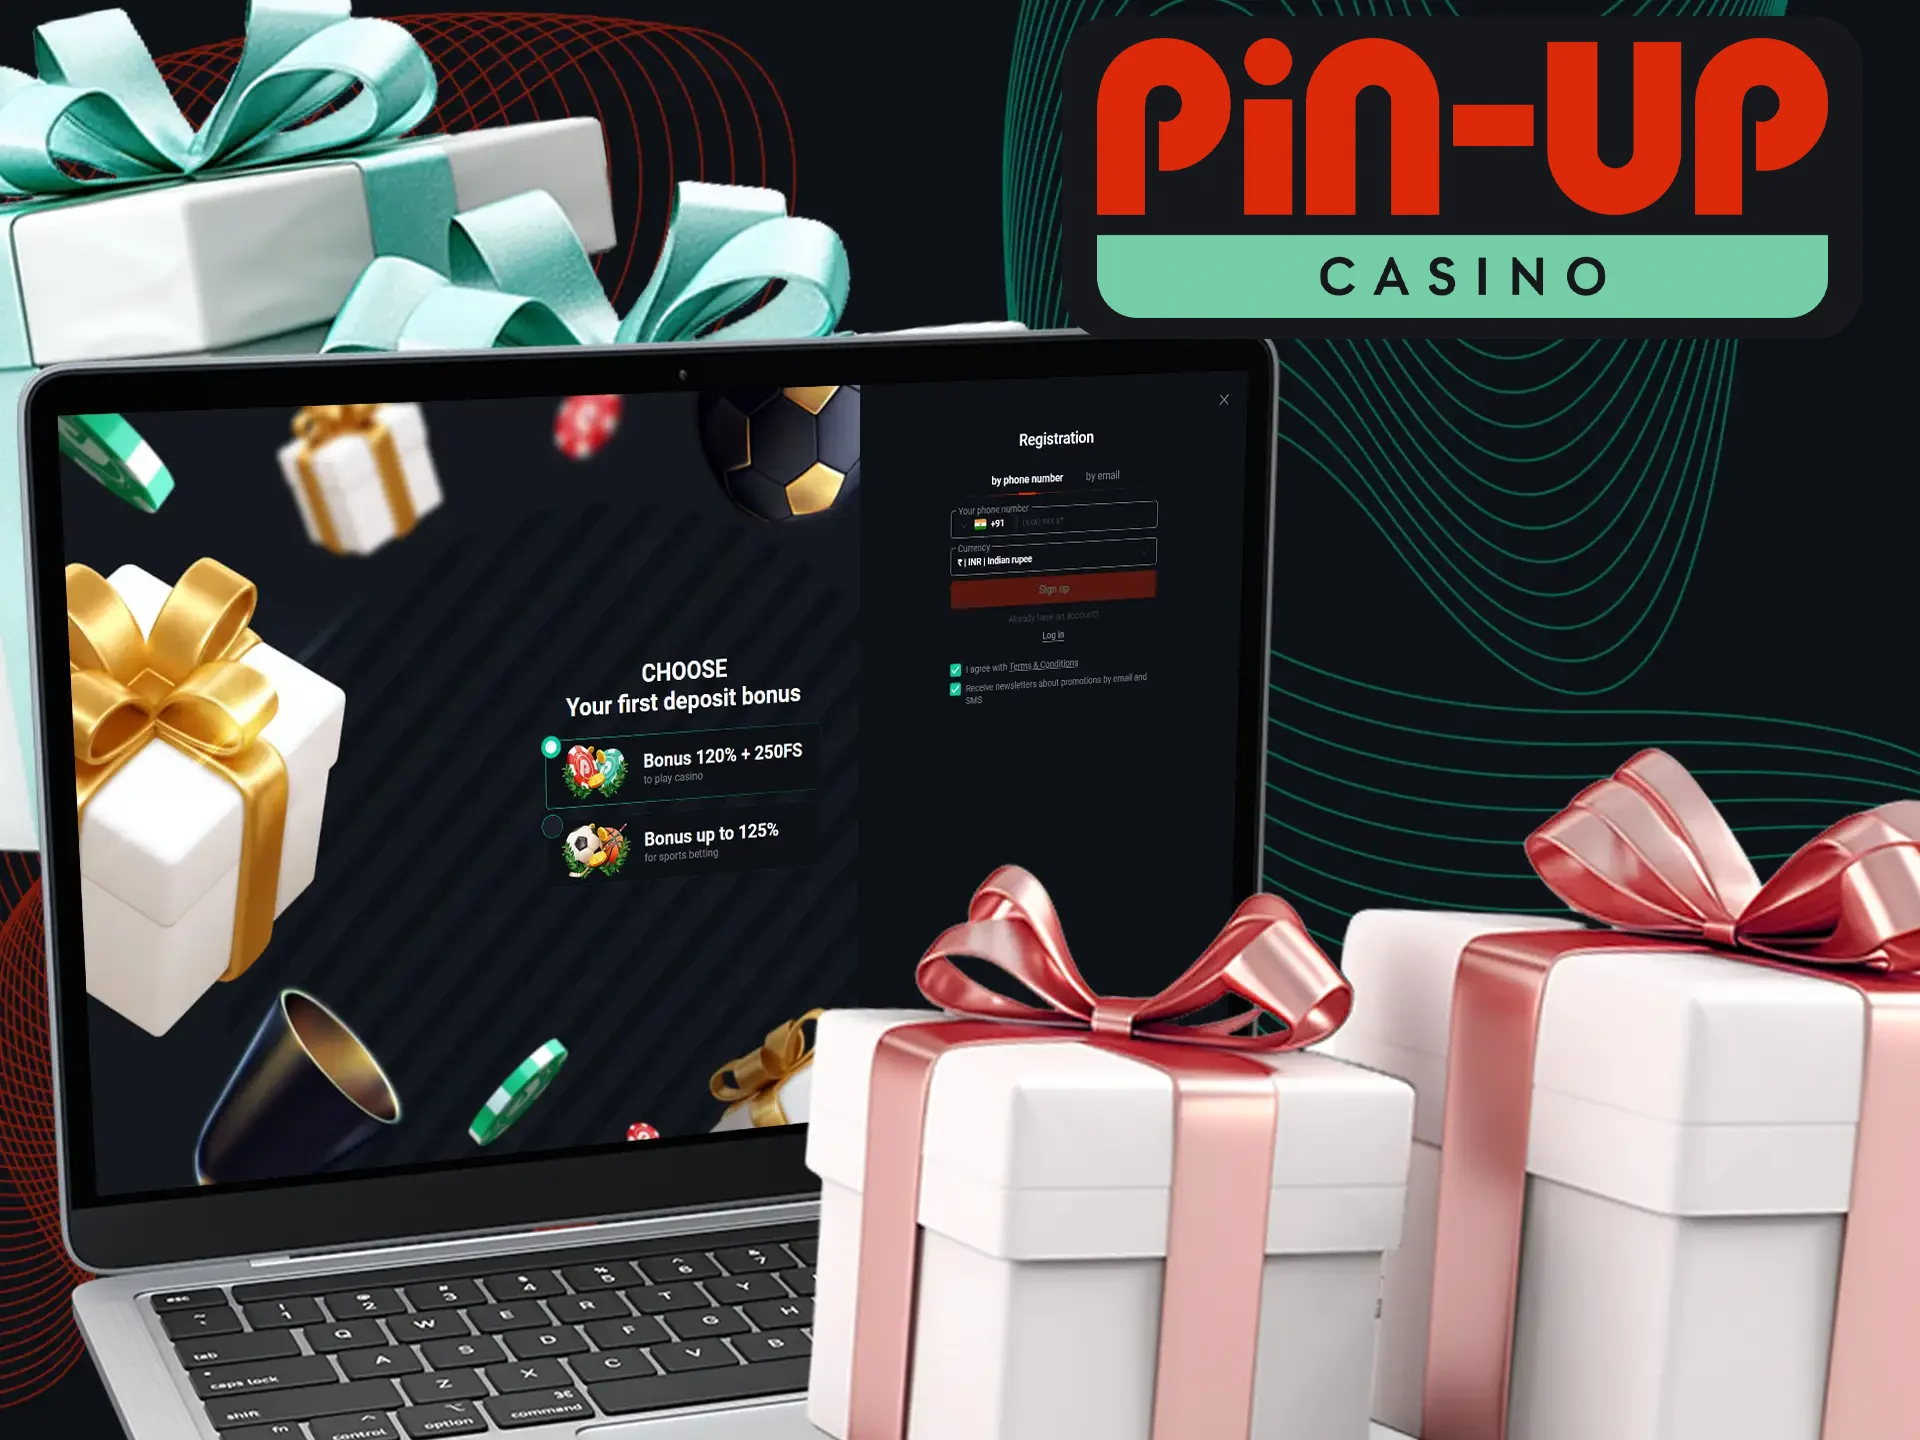 At Pin-Up Casino, players can get an exciting Welcome Bonus.